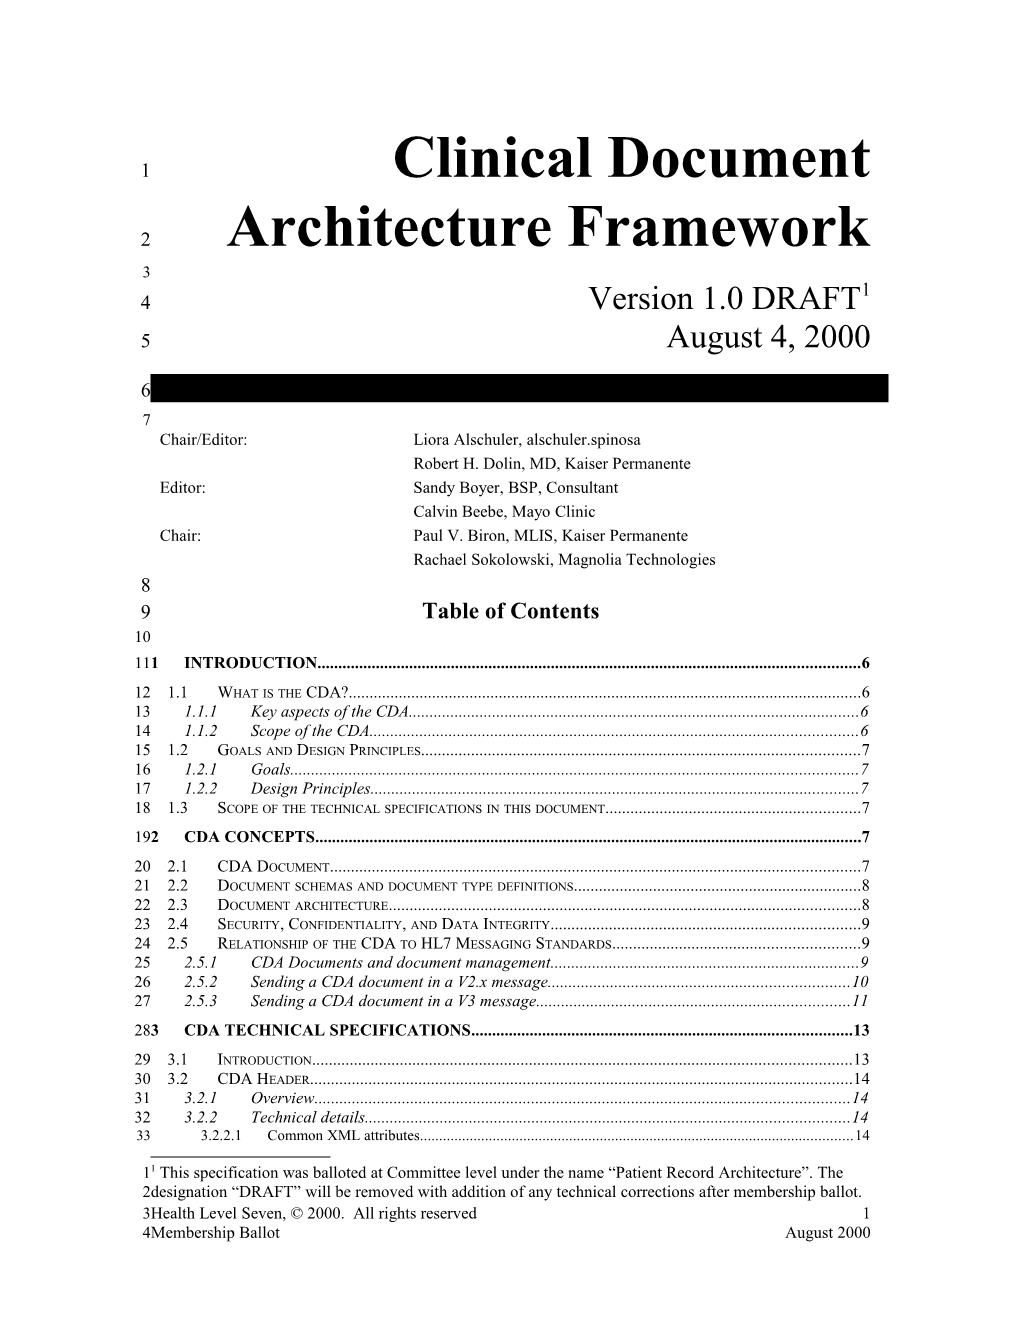 Clinical Document Architecture Framework